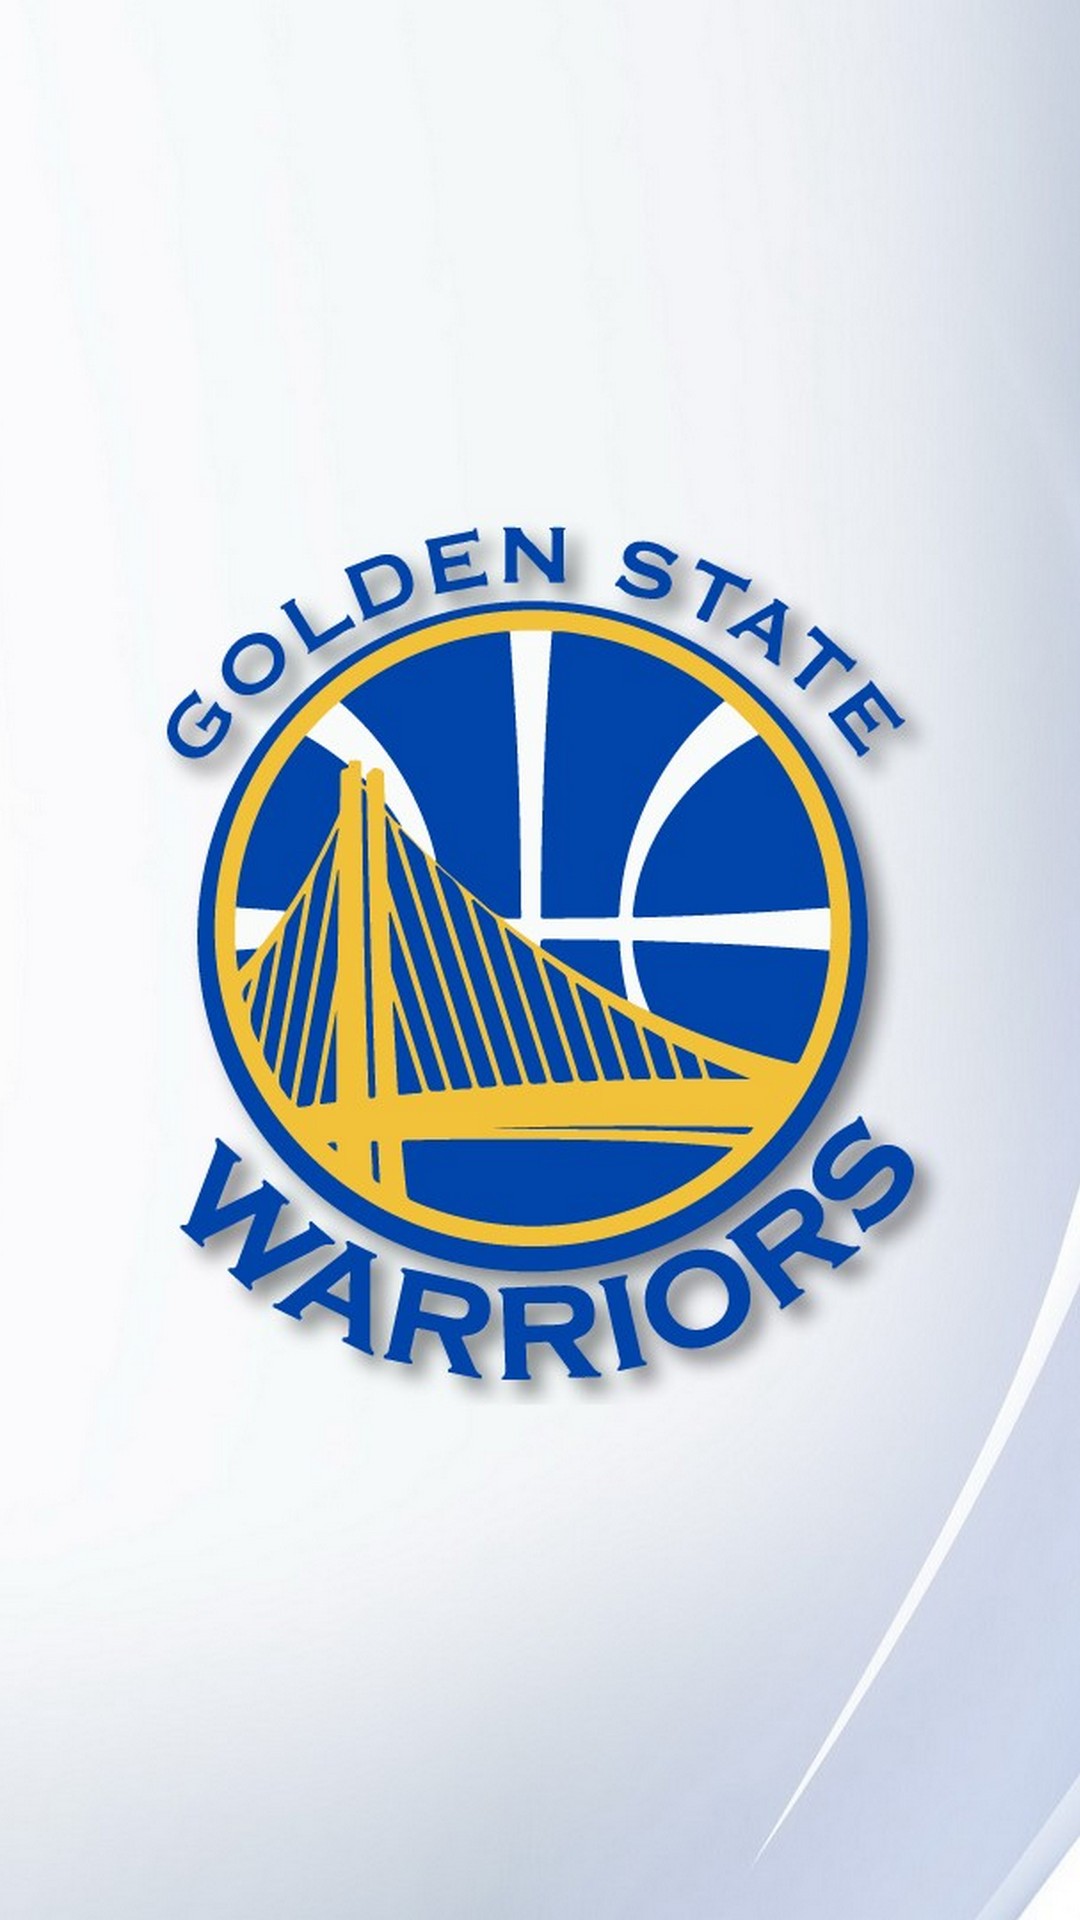 Golden State Warriors Wallpaper For Mobile Android With Resolution 1080X1920 pixel. You can make this wallpaper for your Desktop Computer Backgrounds, Mac Wallpapers, Android Lock screen or iPhone Screensavers